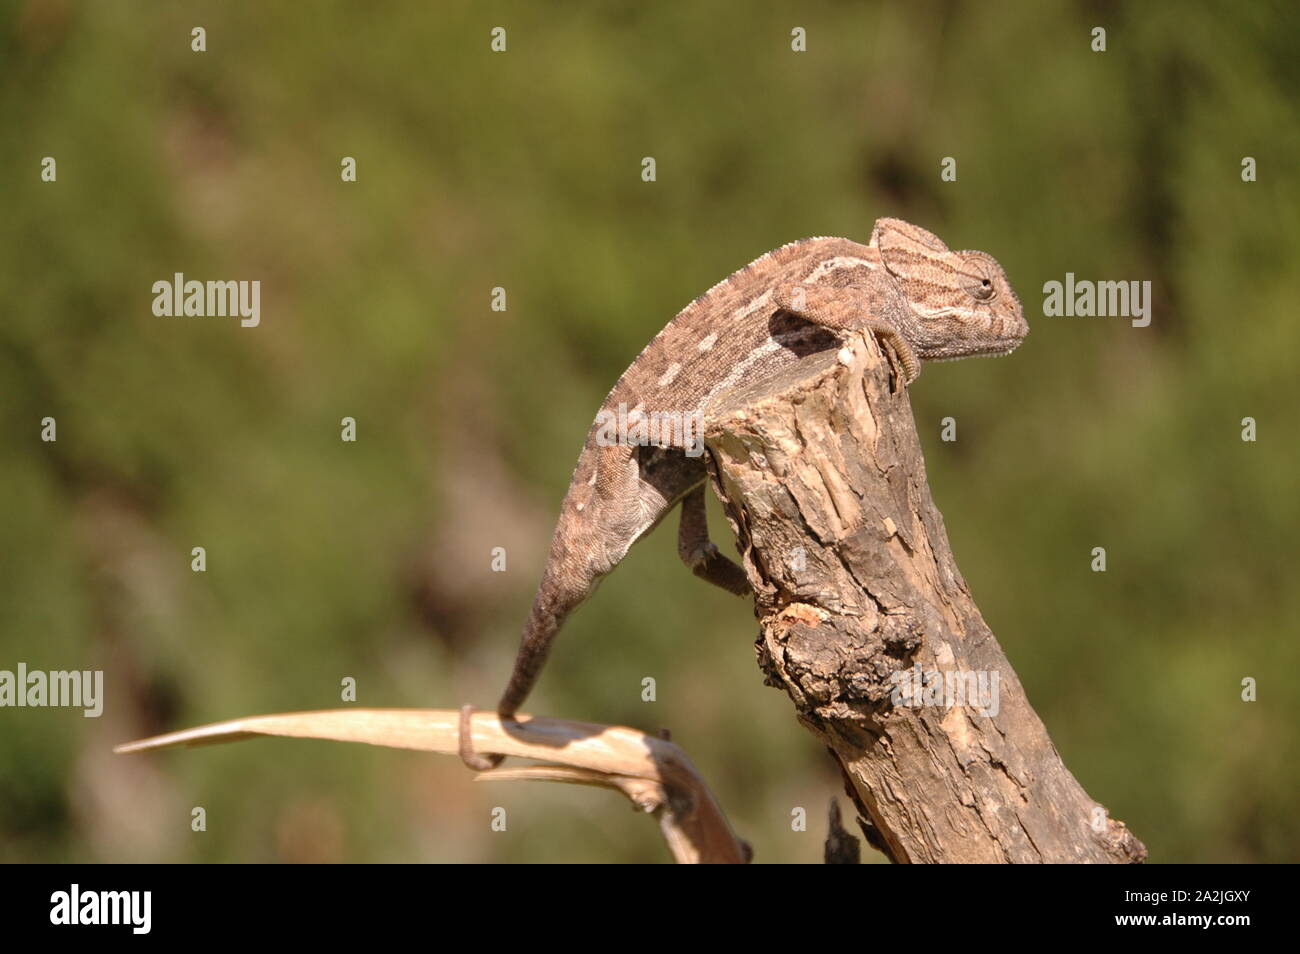 Chameleon species in extinction in malaga on a branch Stock Photo